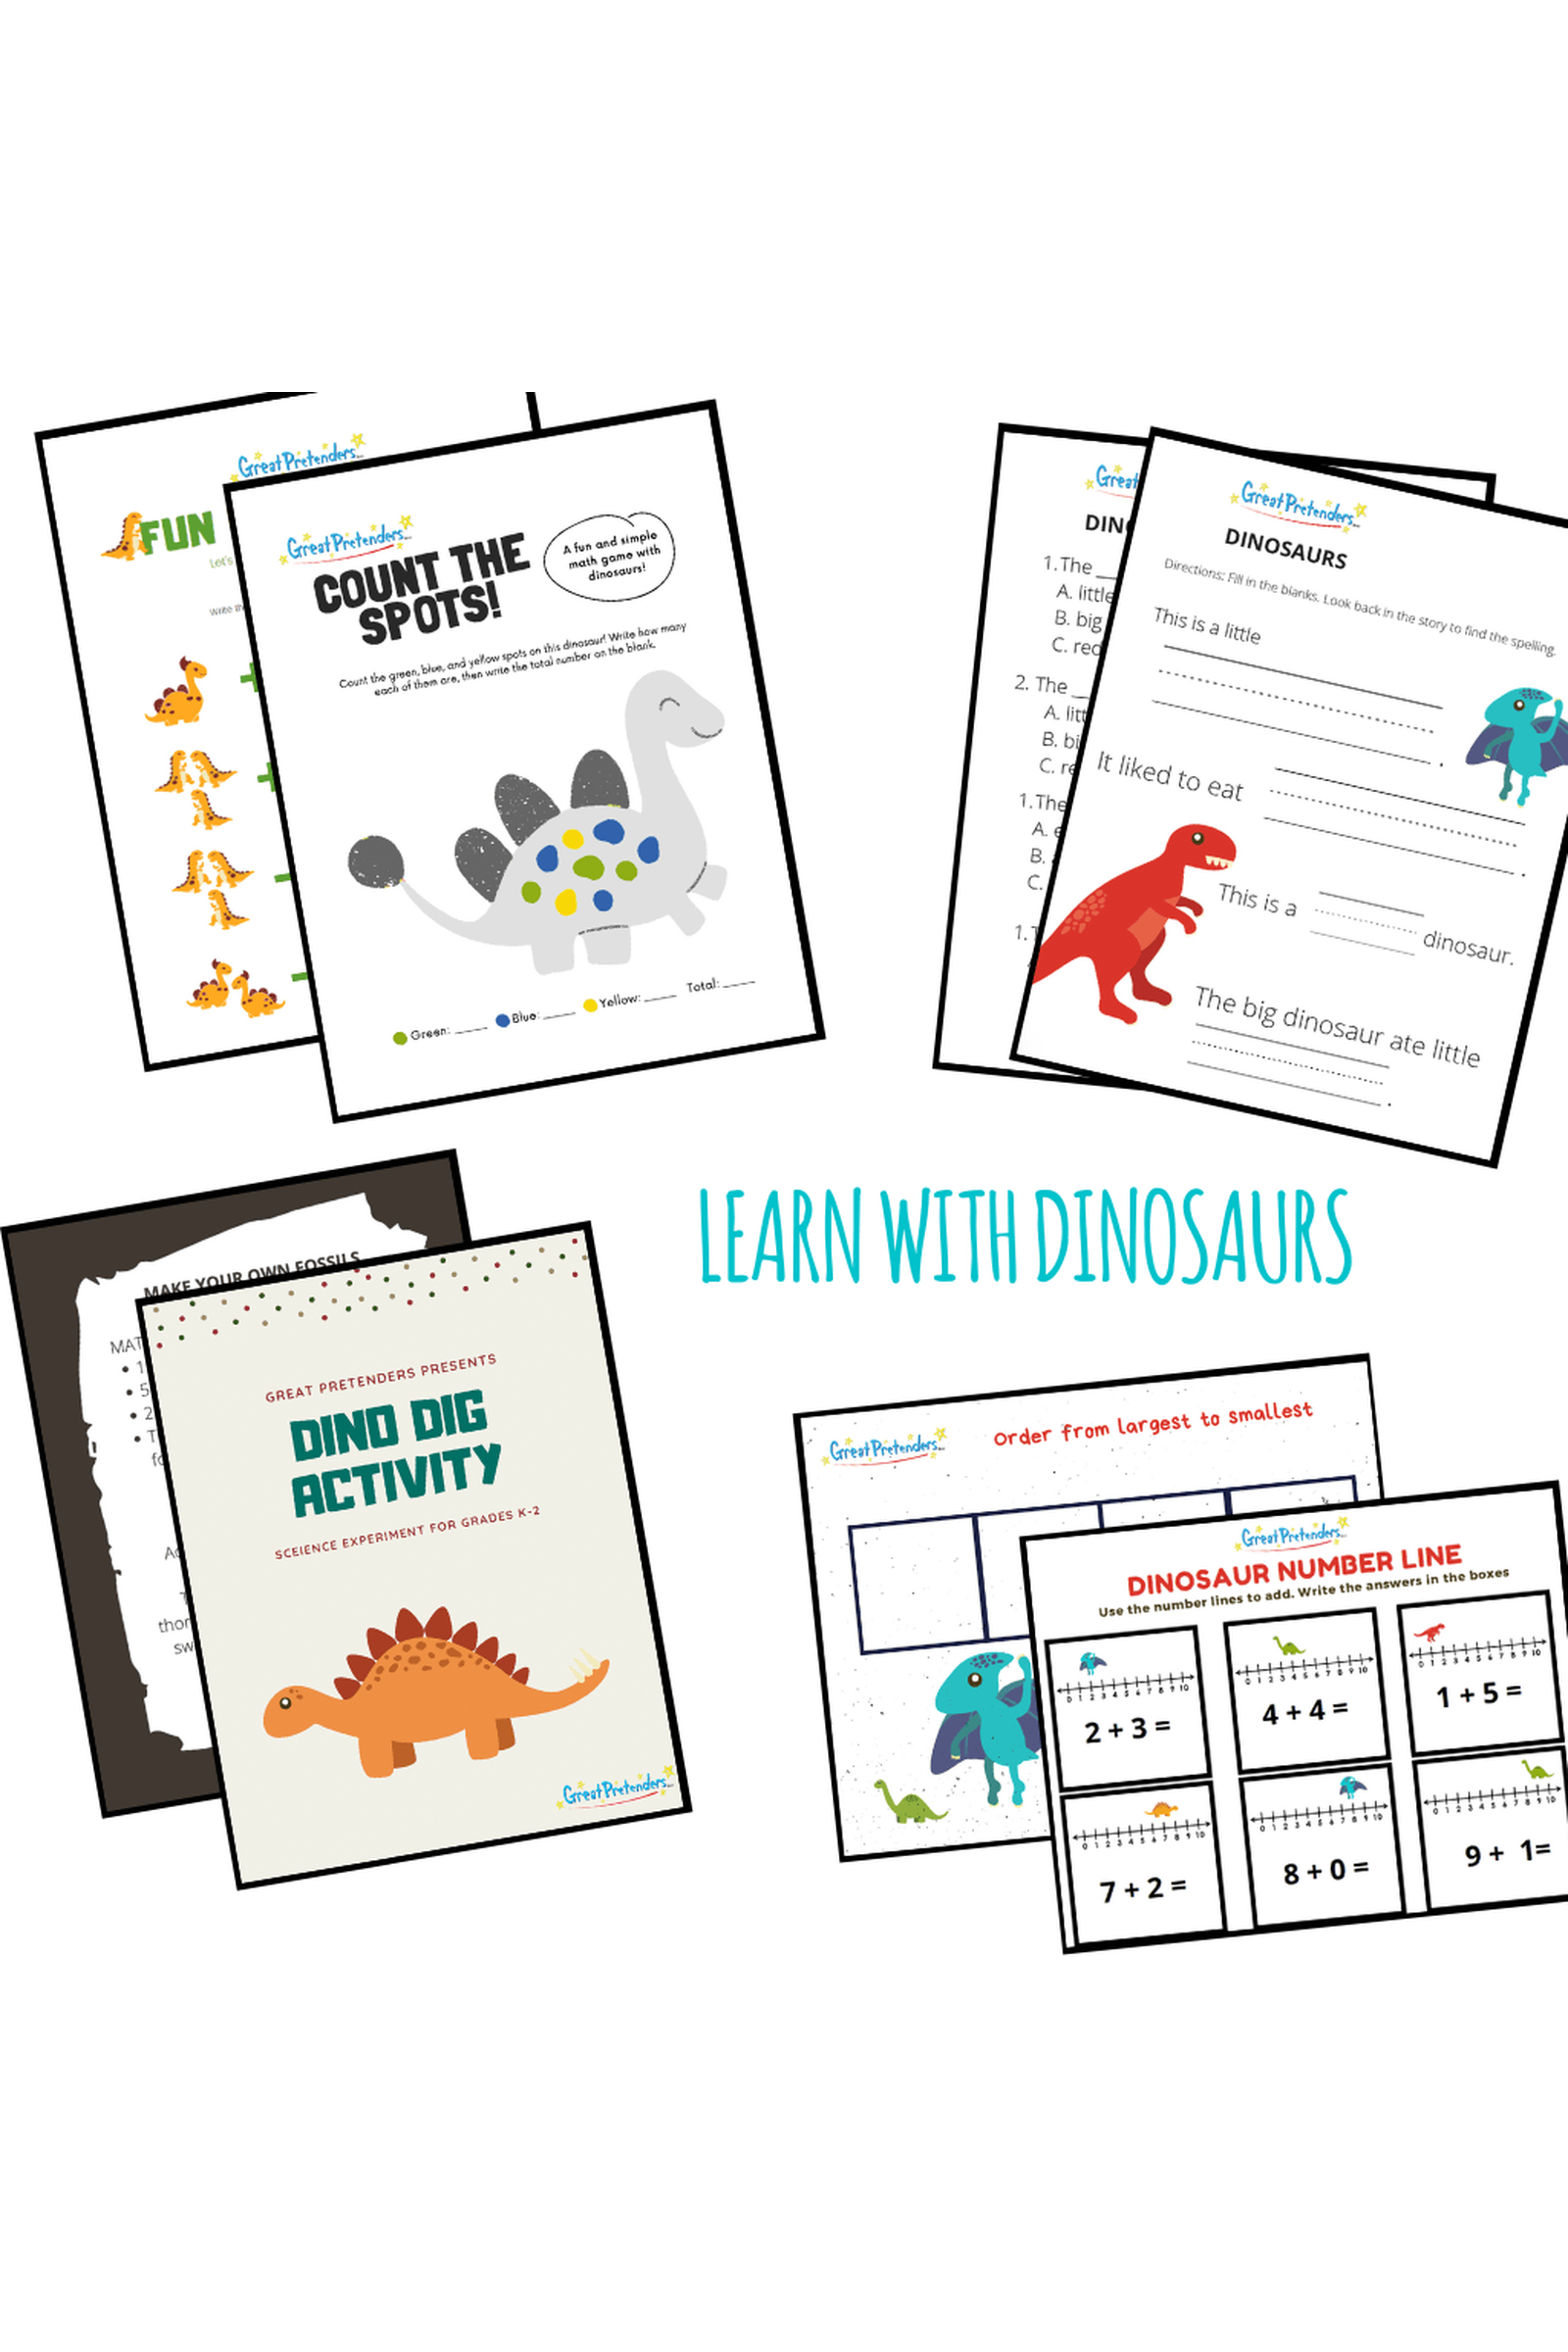 30 Days of Pretend Play - Dinosaur Week Learning Materials